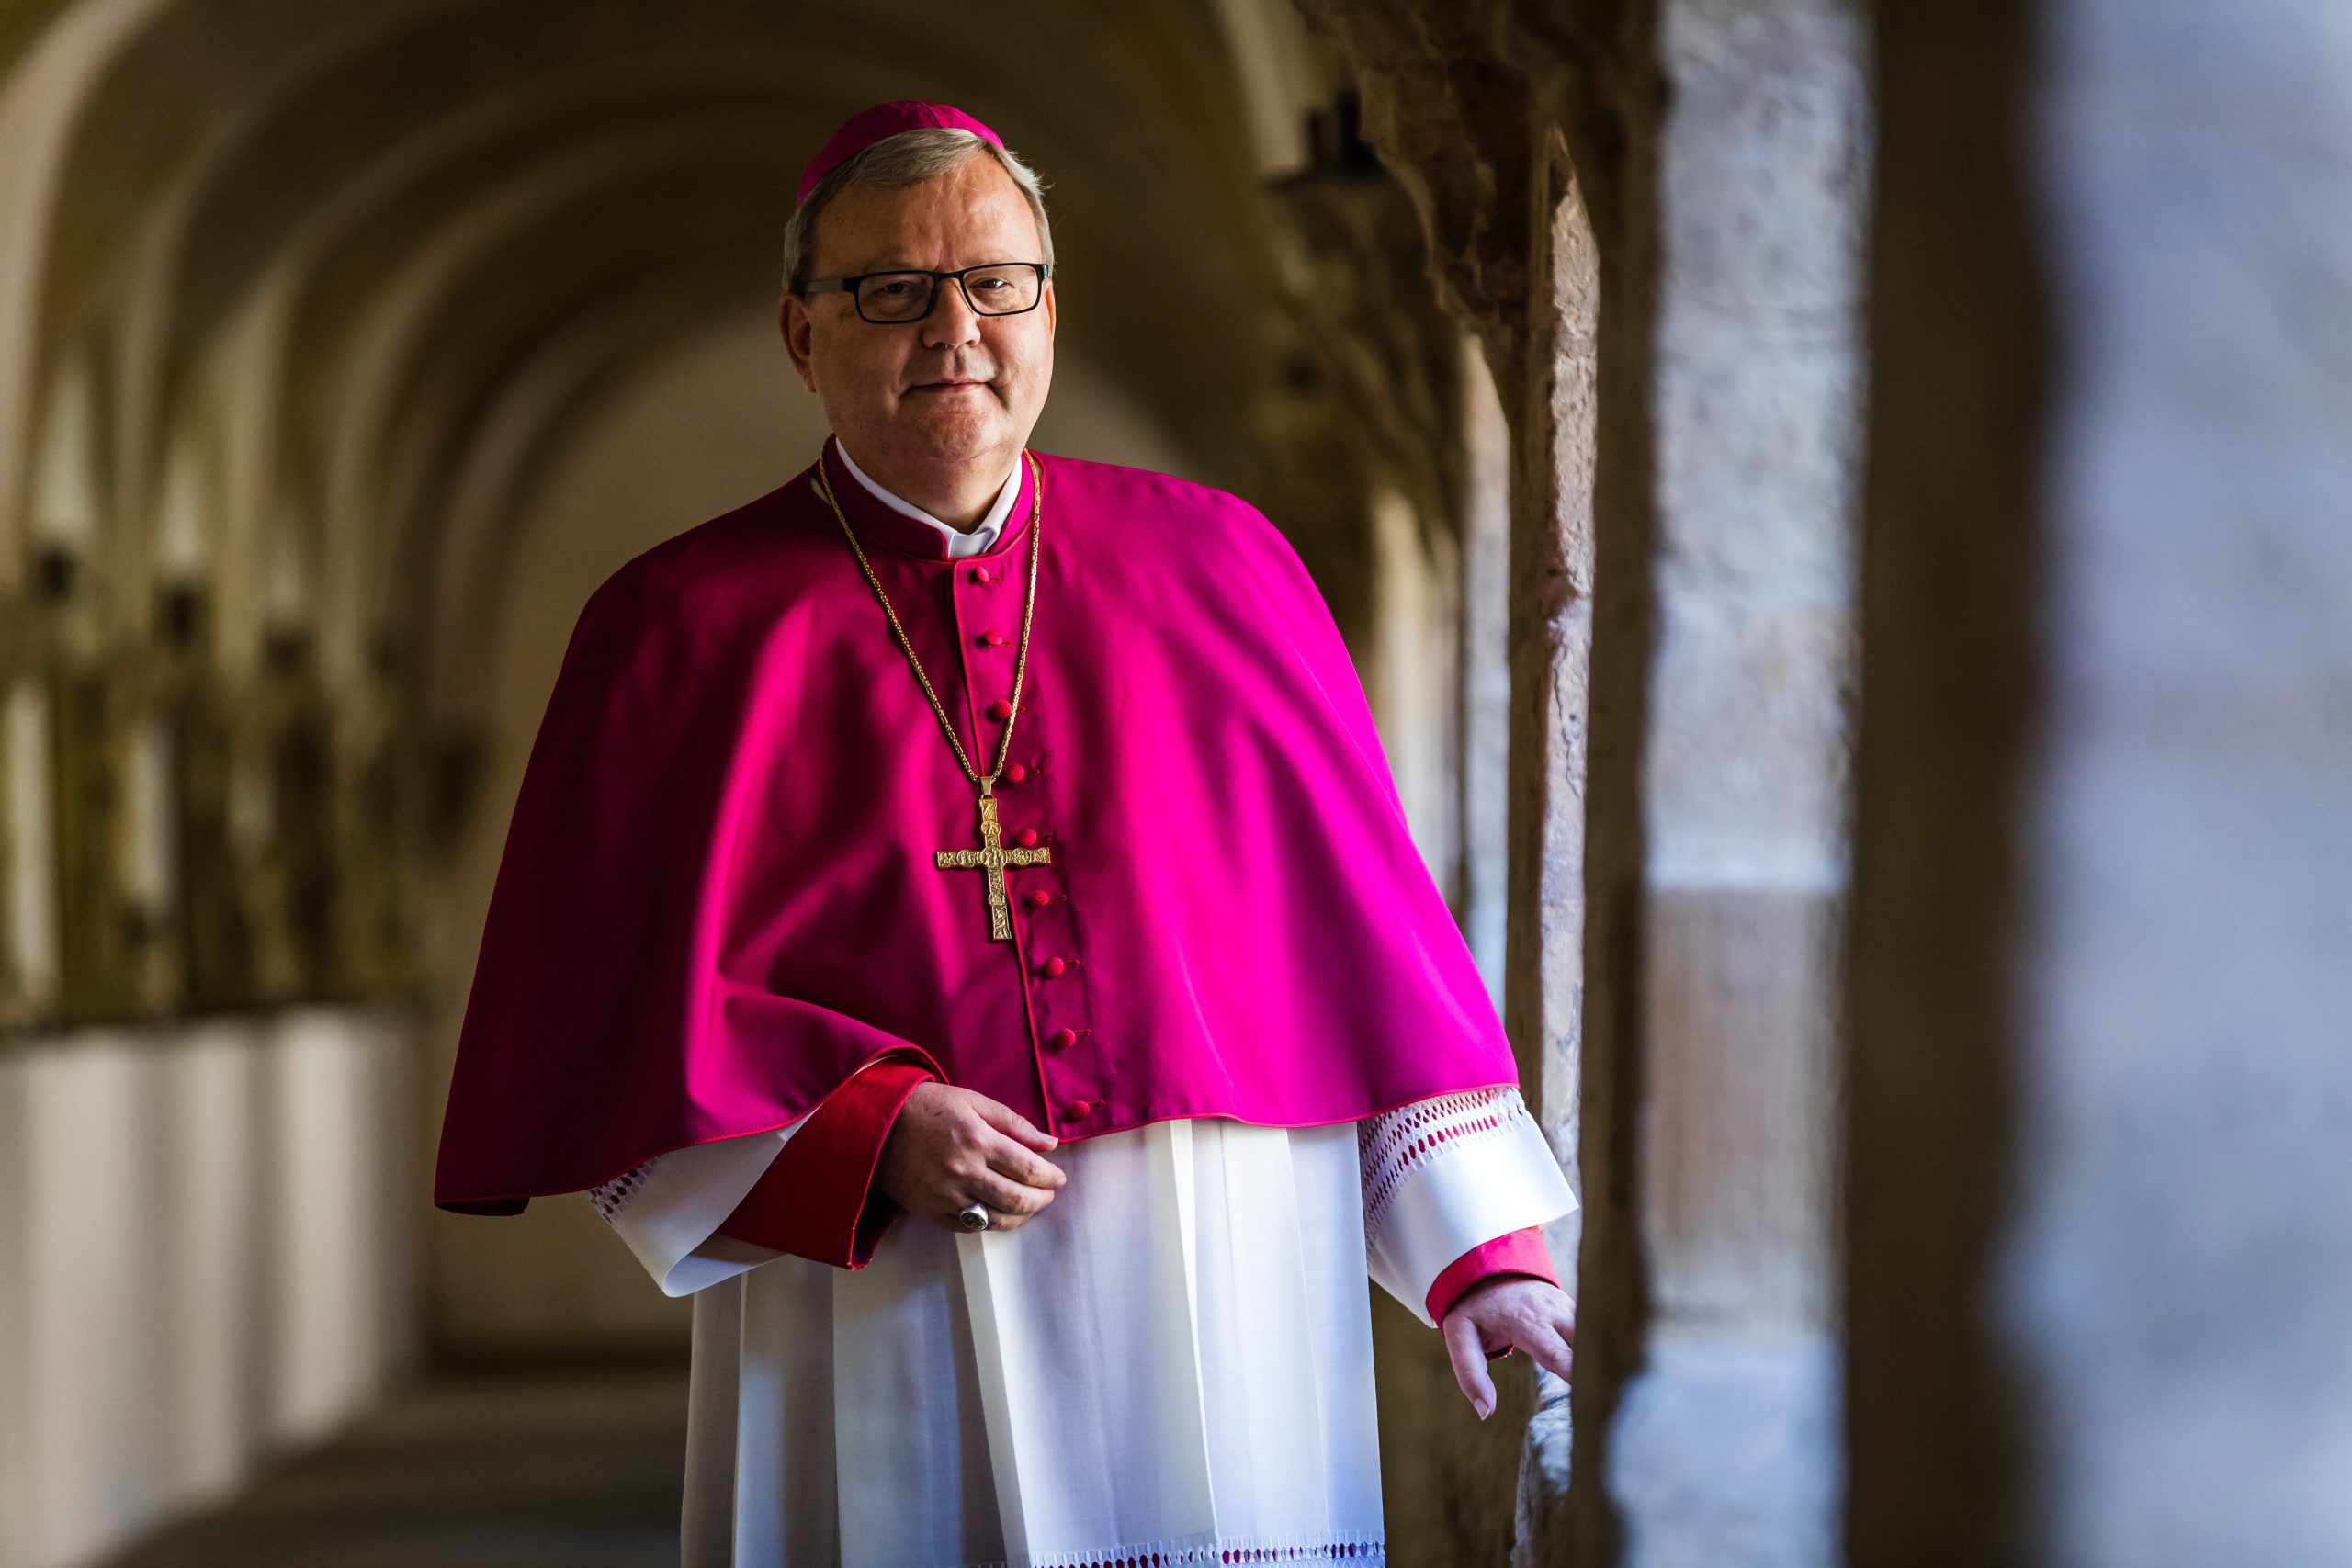 Bishop Franz-Josef Bode of Osnabrueck, Germany, vice president of the German bishops' conference, is pictured in a 2019 file photo. Bishop Bode has become the first Catholic bishop in Germany to resign in connection with the abuse scandal. (OSV News photo/Lars Berg, KNA)